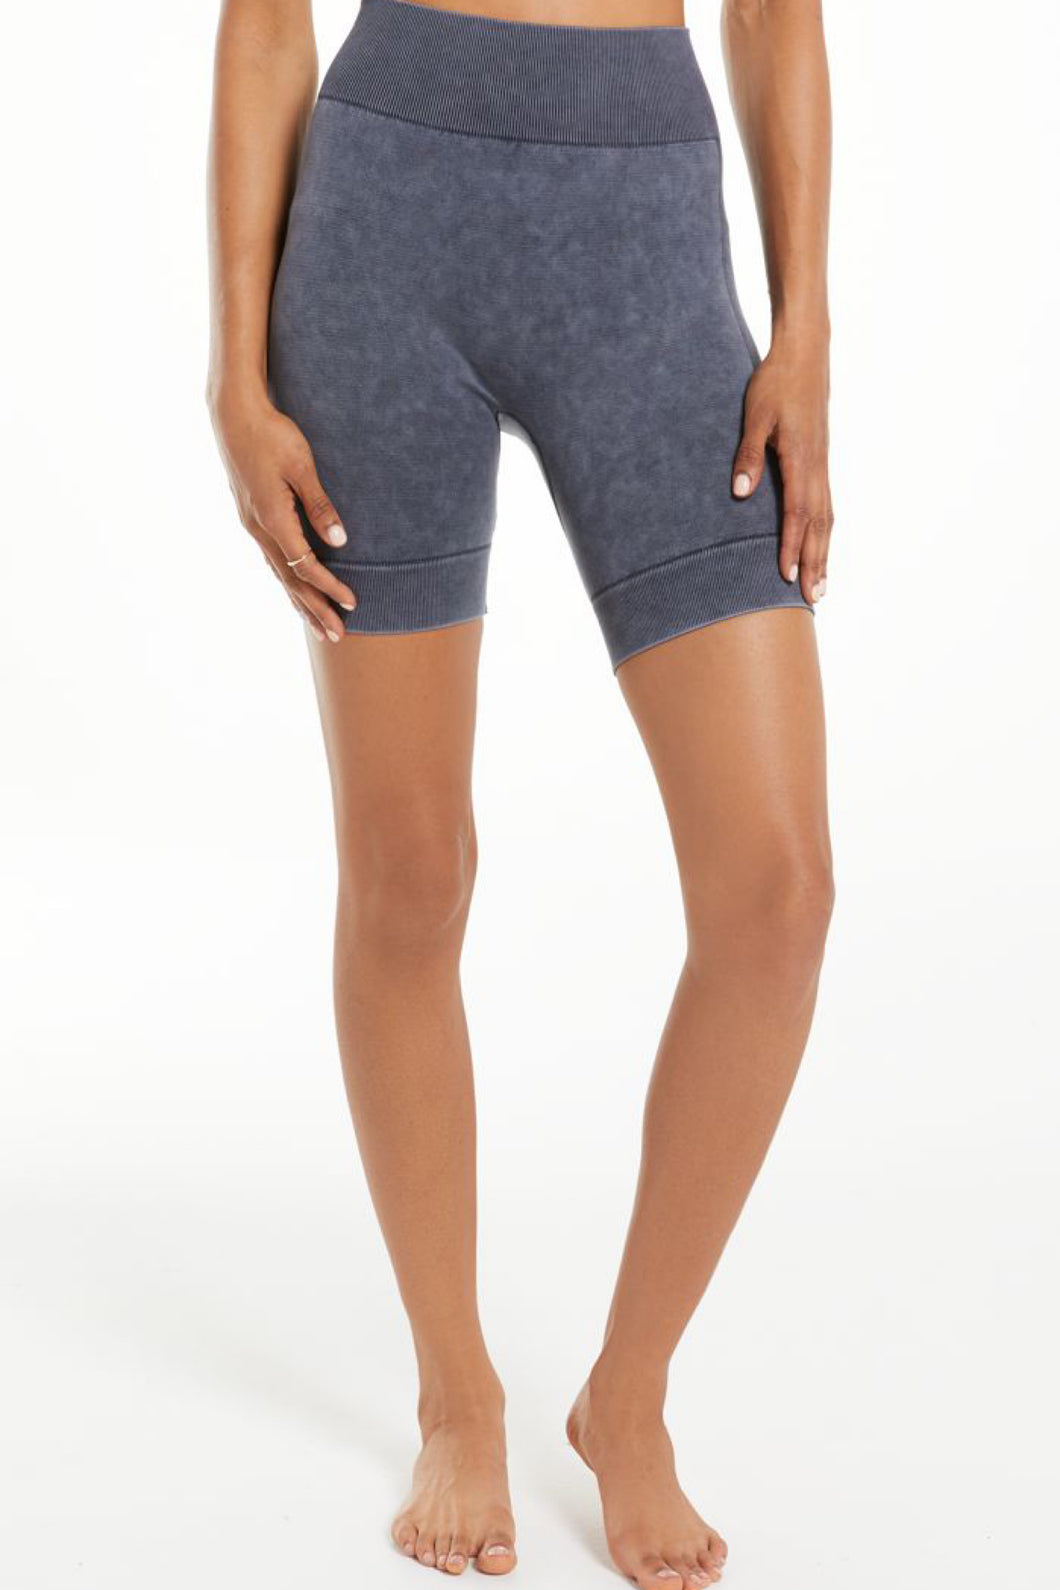 DANCE IT OUT SEAMLESS SHORTS